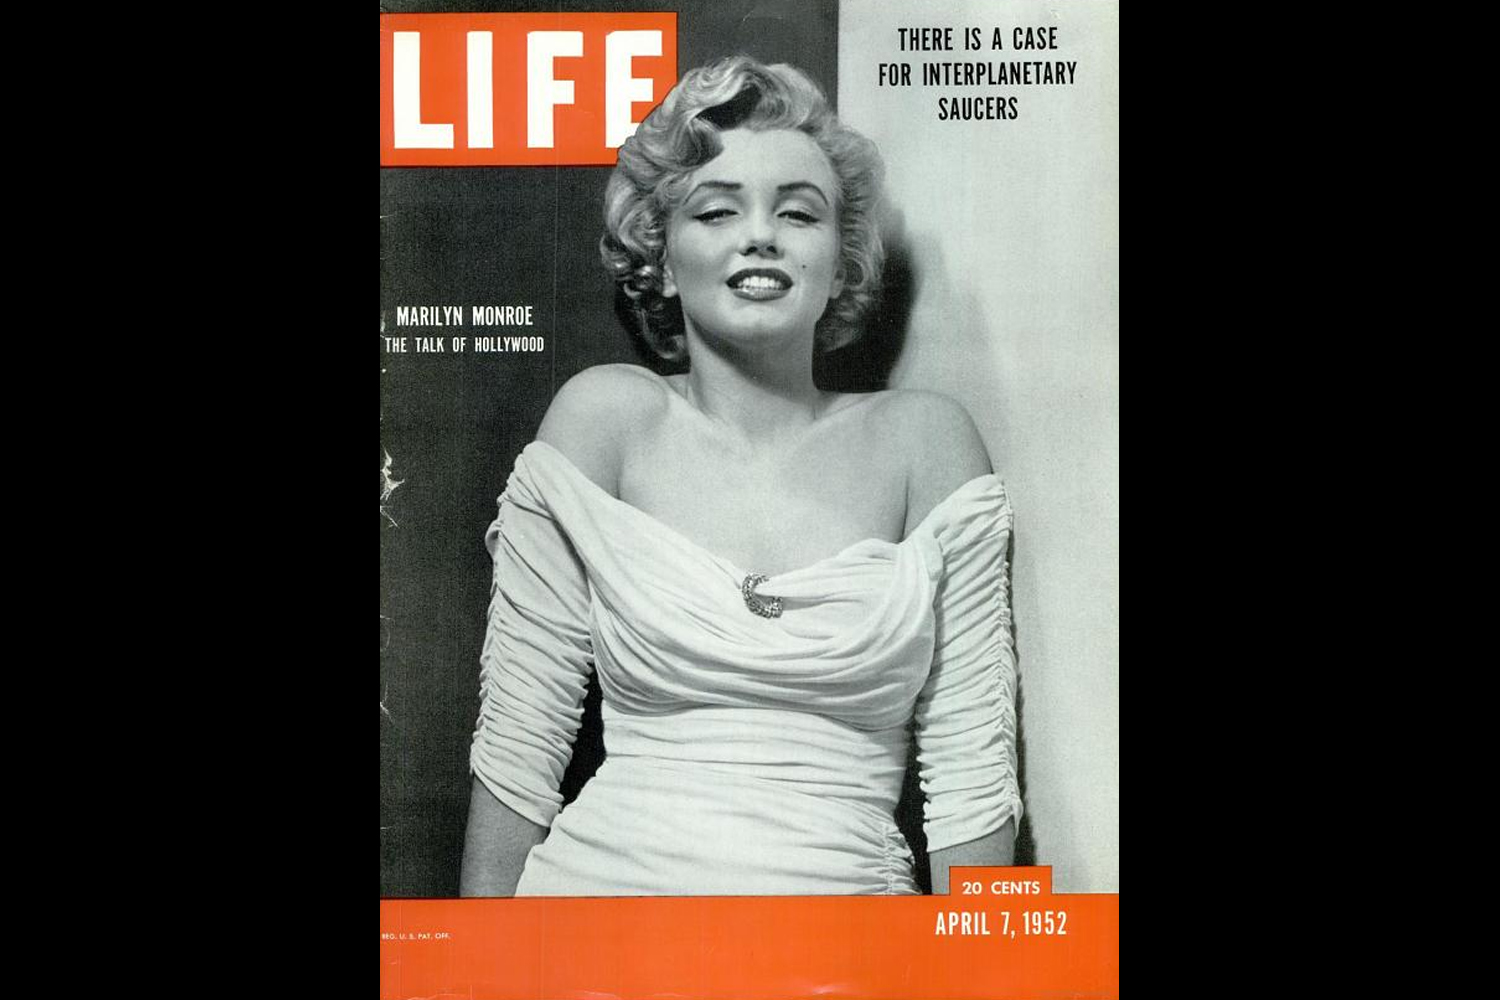 LIFE Magazine, April 7, 1952. Marilyn Monroe's debut on the magazine's cover, photographed by Philippe Halsman.